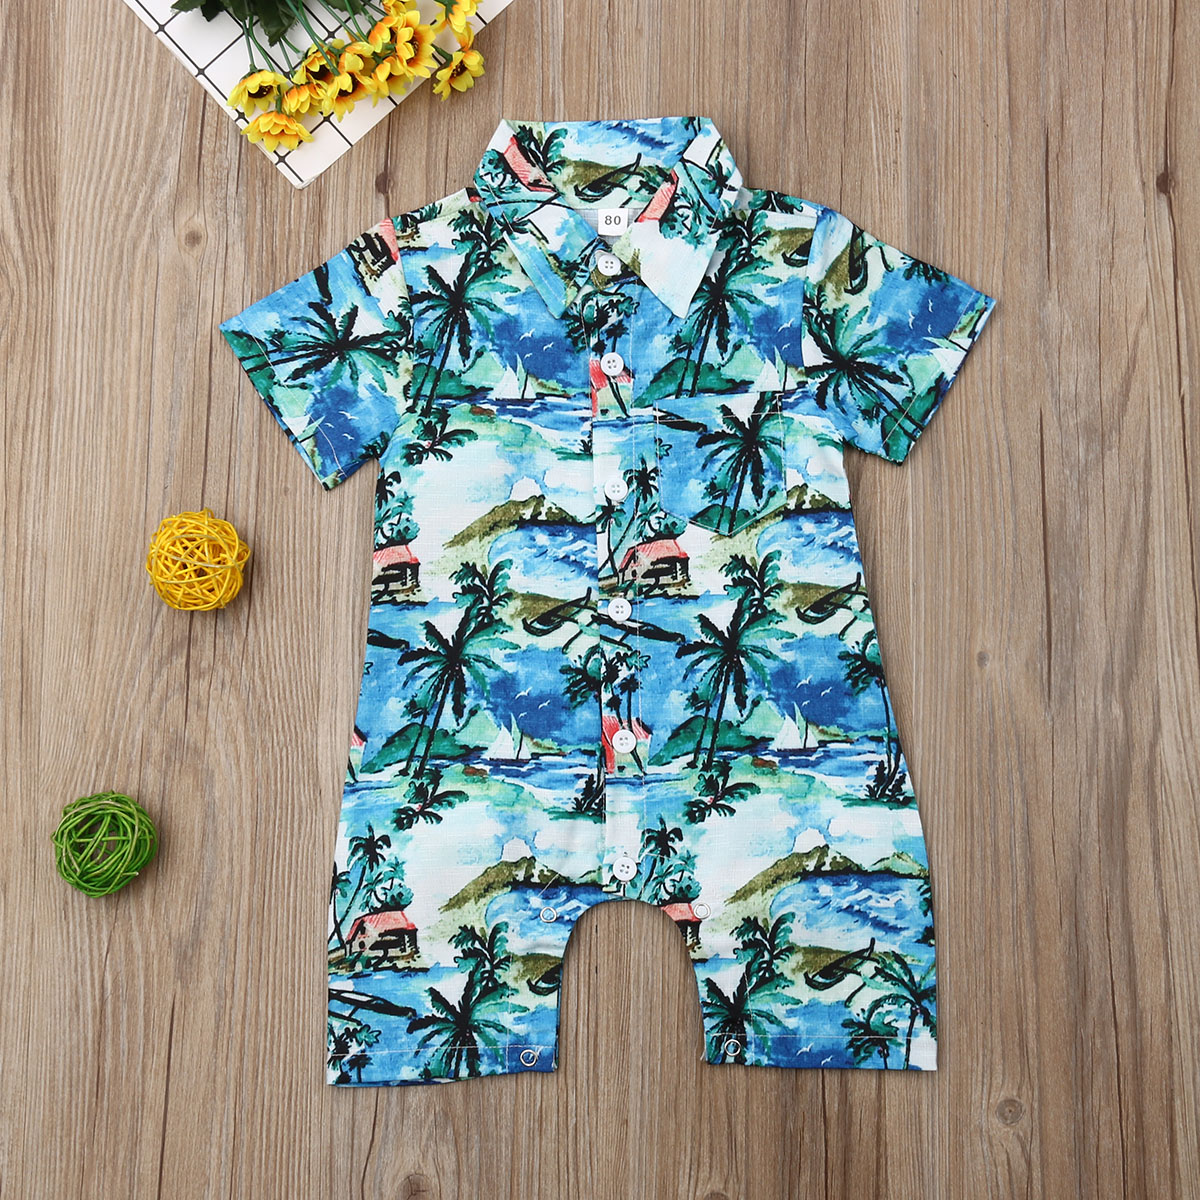 Newborn Baby Boys Summer Clothes Cotton Romper Casual Hawaiian Jumpsuit Outfit